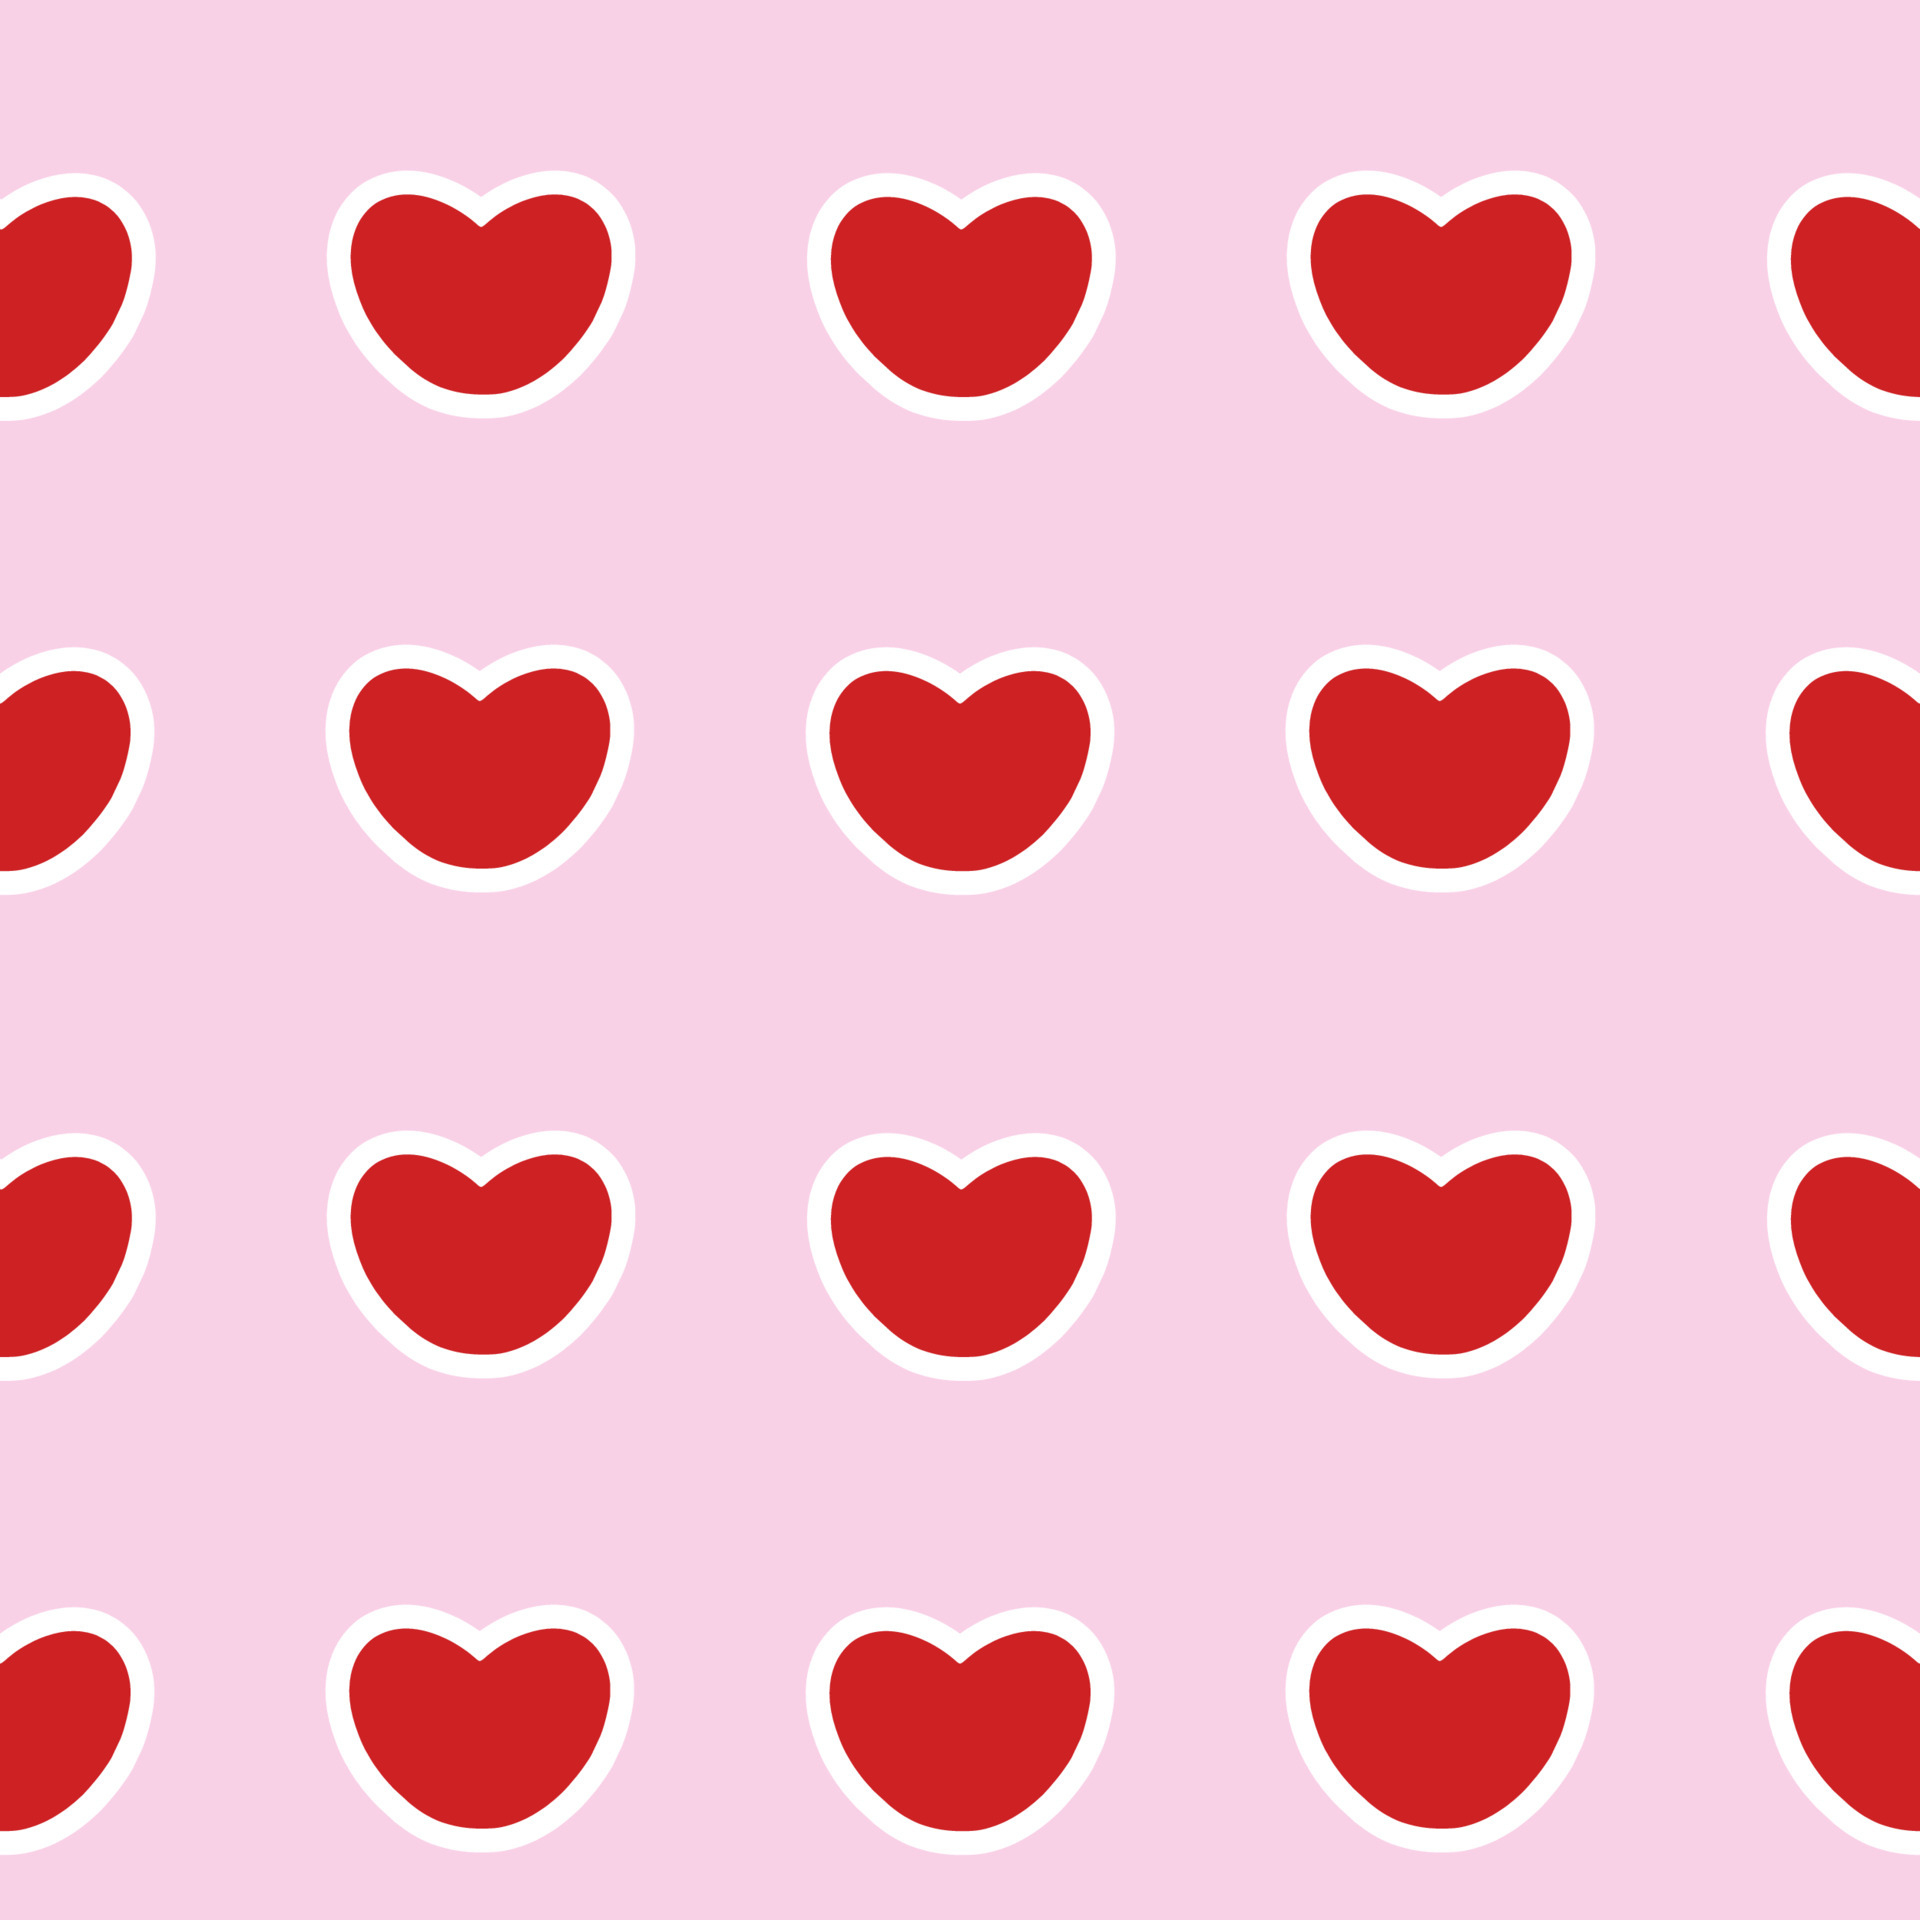 1920x1920 A beautiful red heart with a white outline. Endless seamless background with red heart. Pattern for Valentine's day. Wallpaper for textiles, tailoring, printing on fabric. 4731848 Vector Art